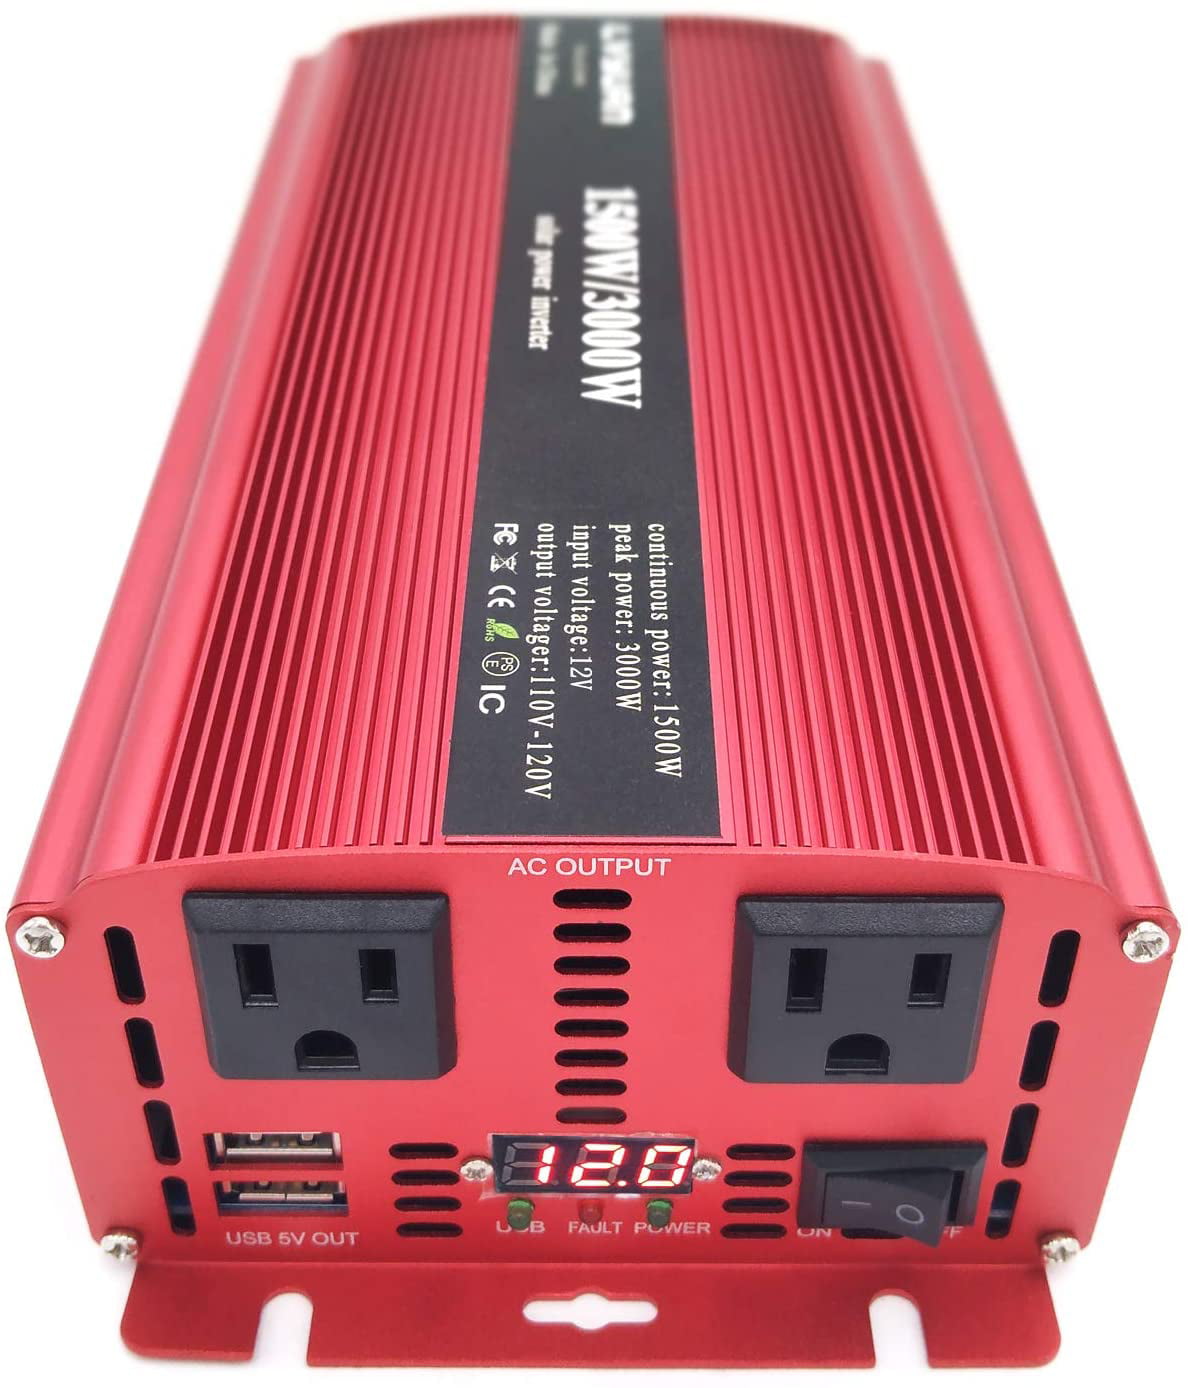 Yinleader 1500W/3000W Power Inverter Dual AC Outlets and Dual USB Charging Ports DC TO AC 24V TO 230V 240V Car Converter